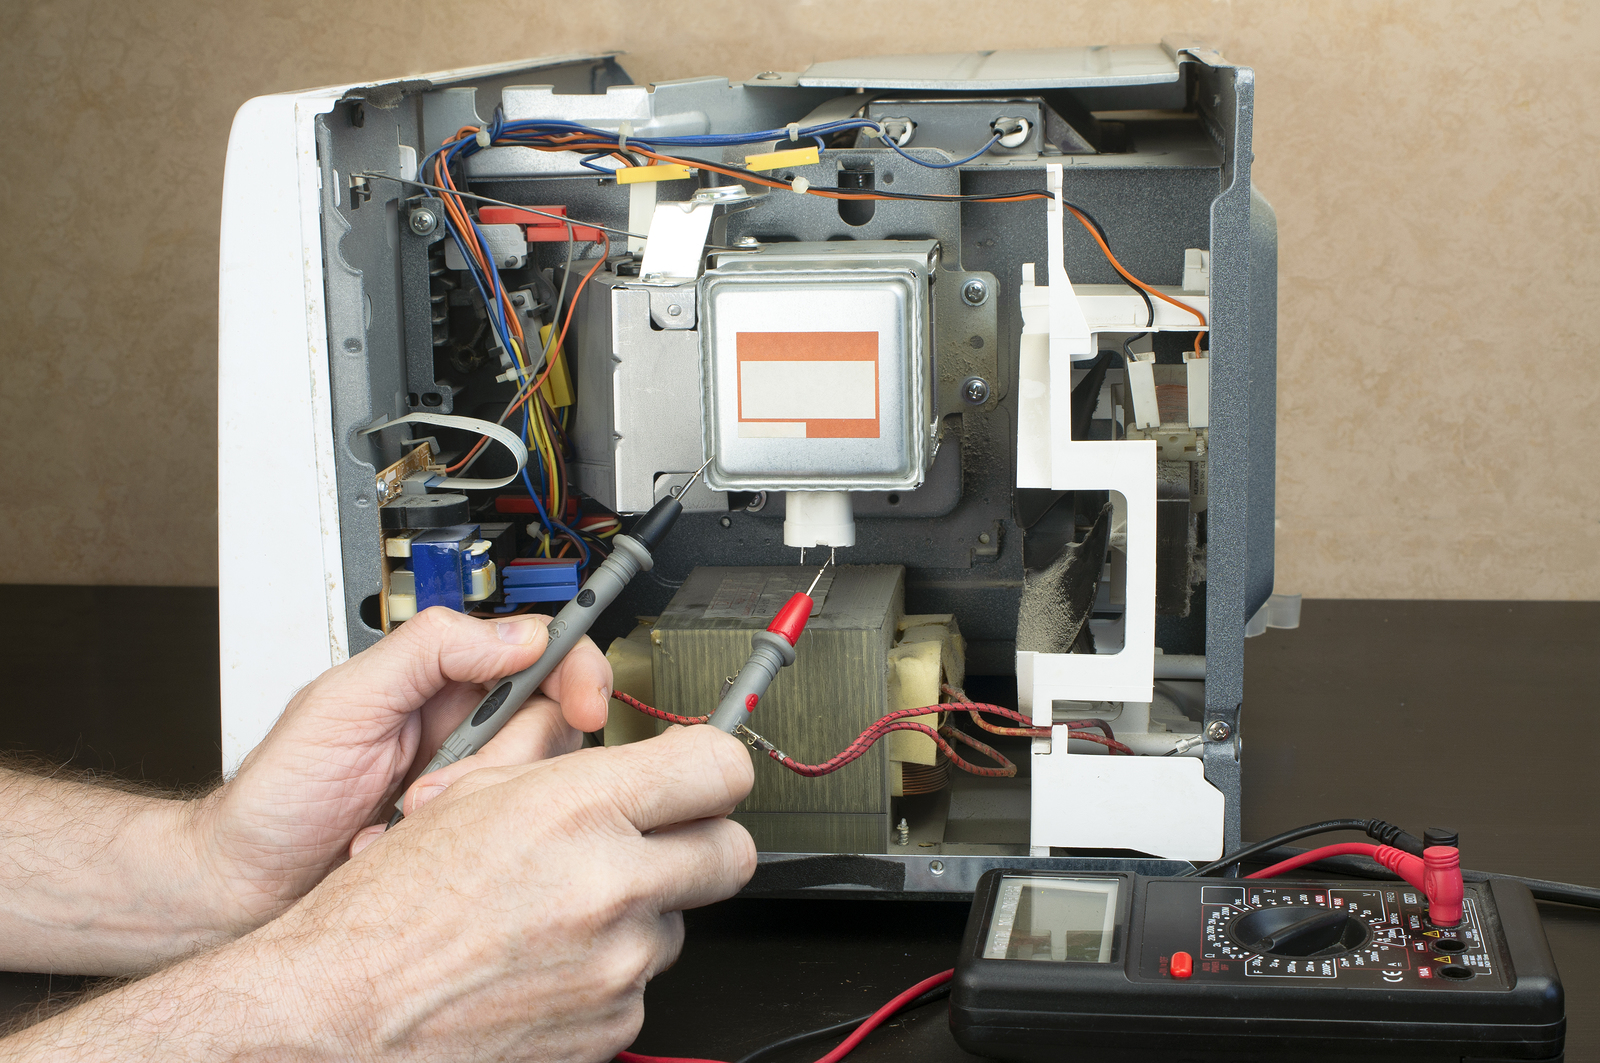 Affordable Appliance Repairs